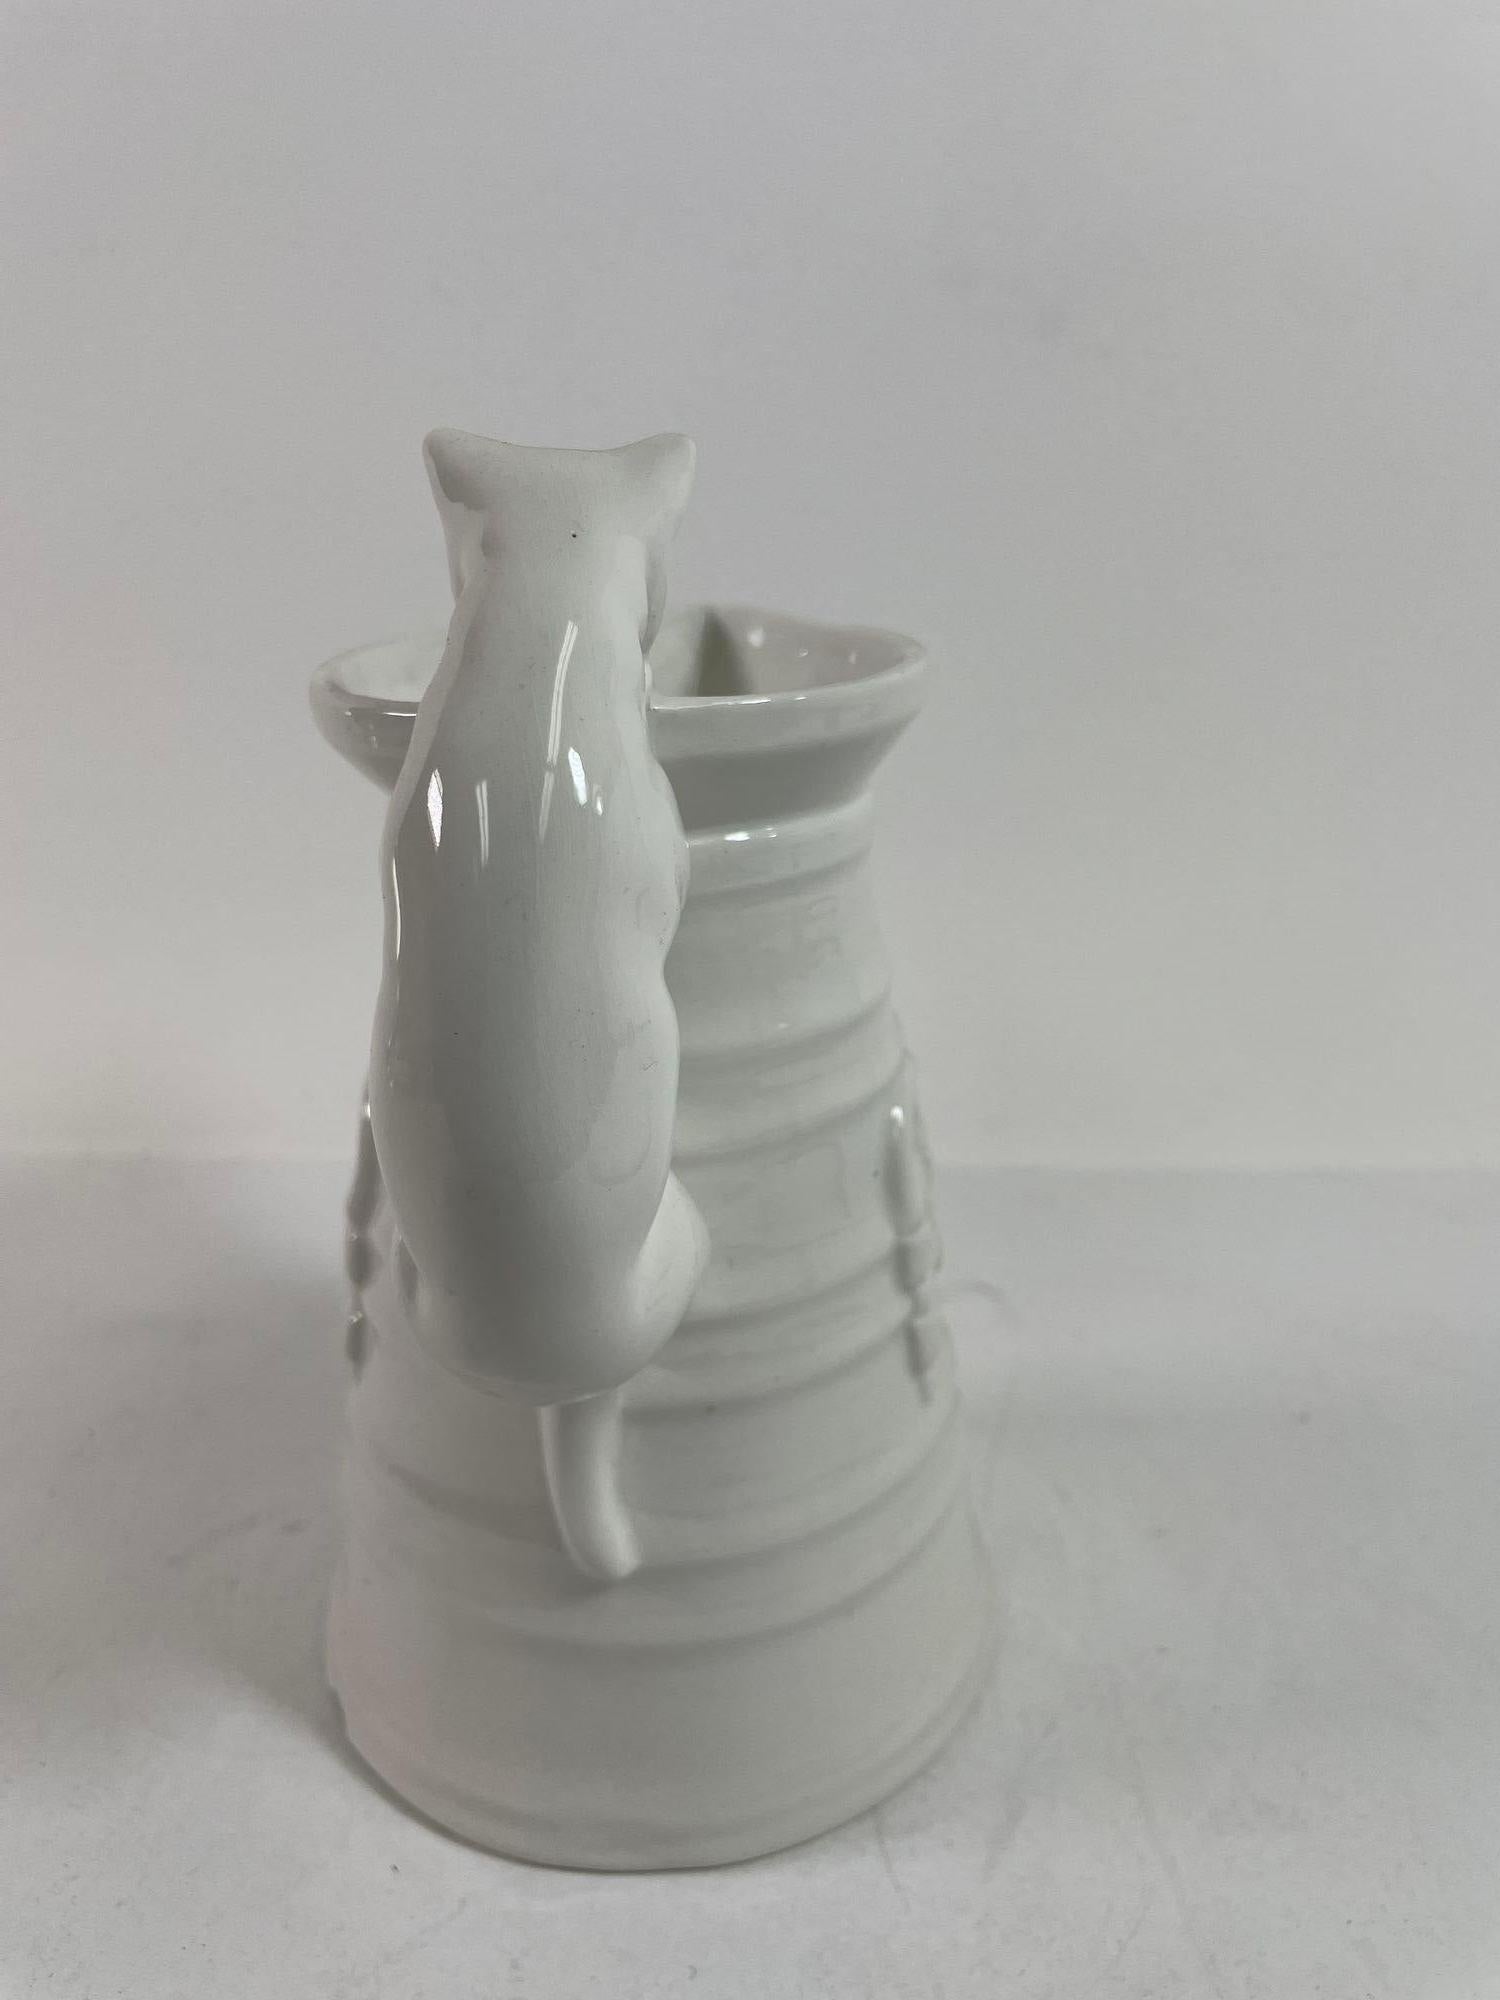 Vintage White Porcelain Cat Pitcher Made in Italy For Sale 3